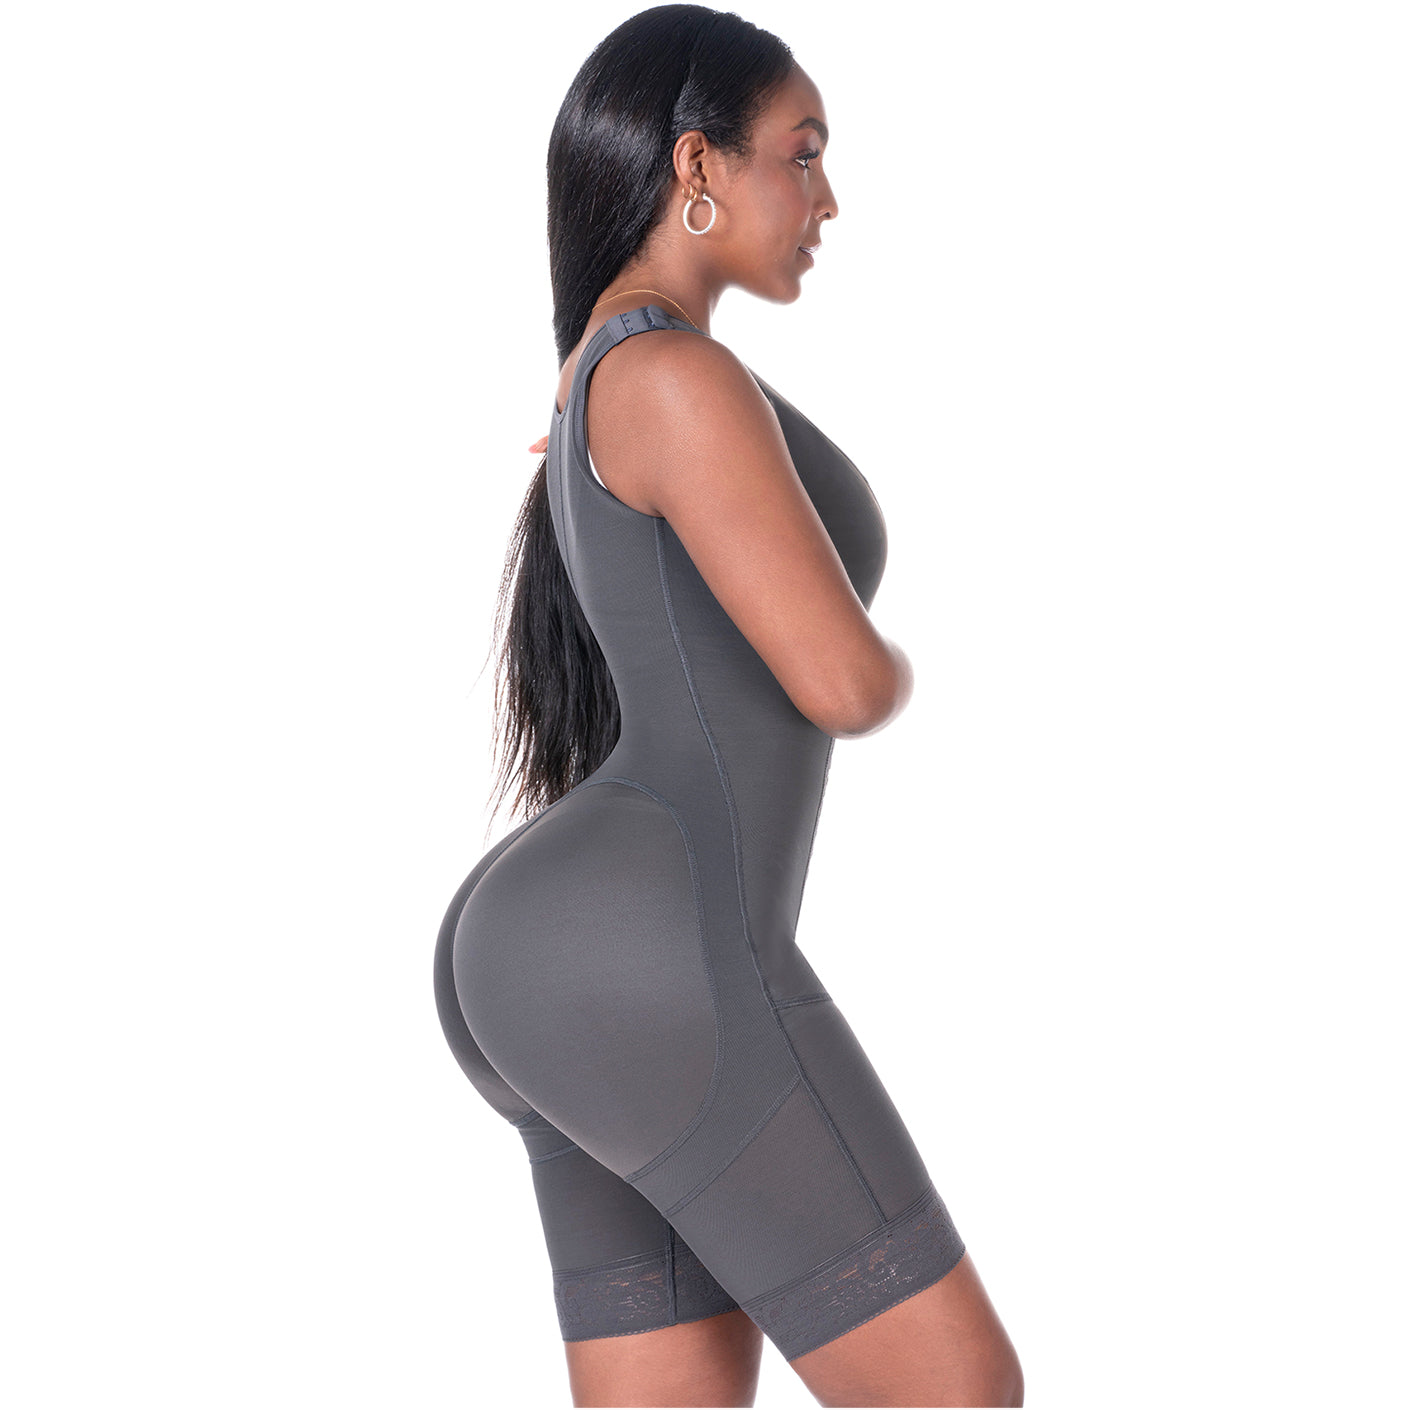 Bling Shapers 553BF |  Get Ready to Shine with Bling Shapers Extreme 553BF: The Ultimate Shapewear Bodysuit with Built-In Bra | Perfect for All-Day Confidence and Comfort | Discover the Power of Powernet